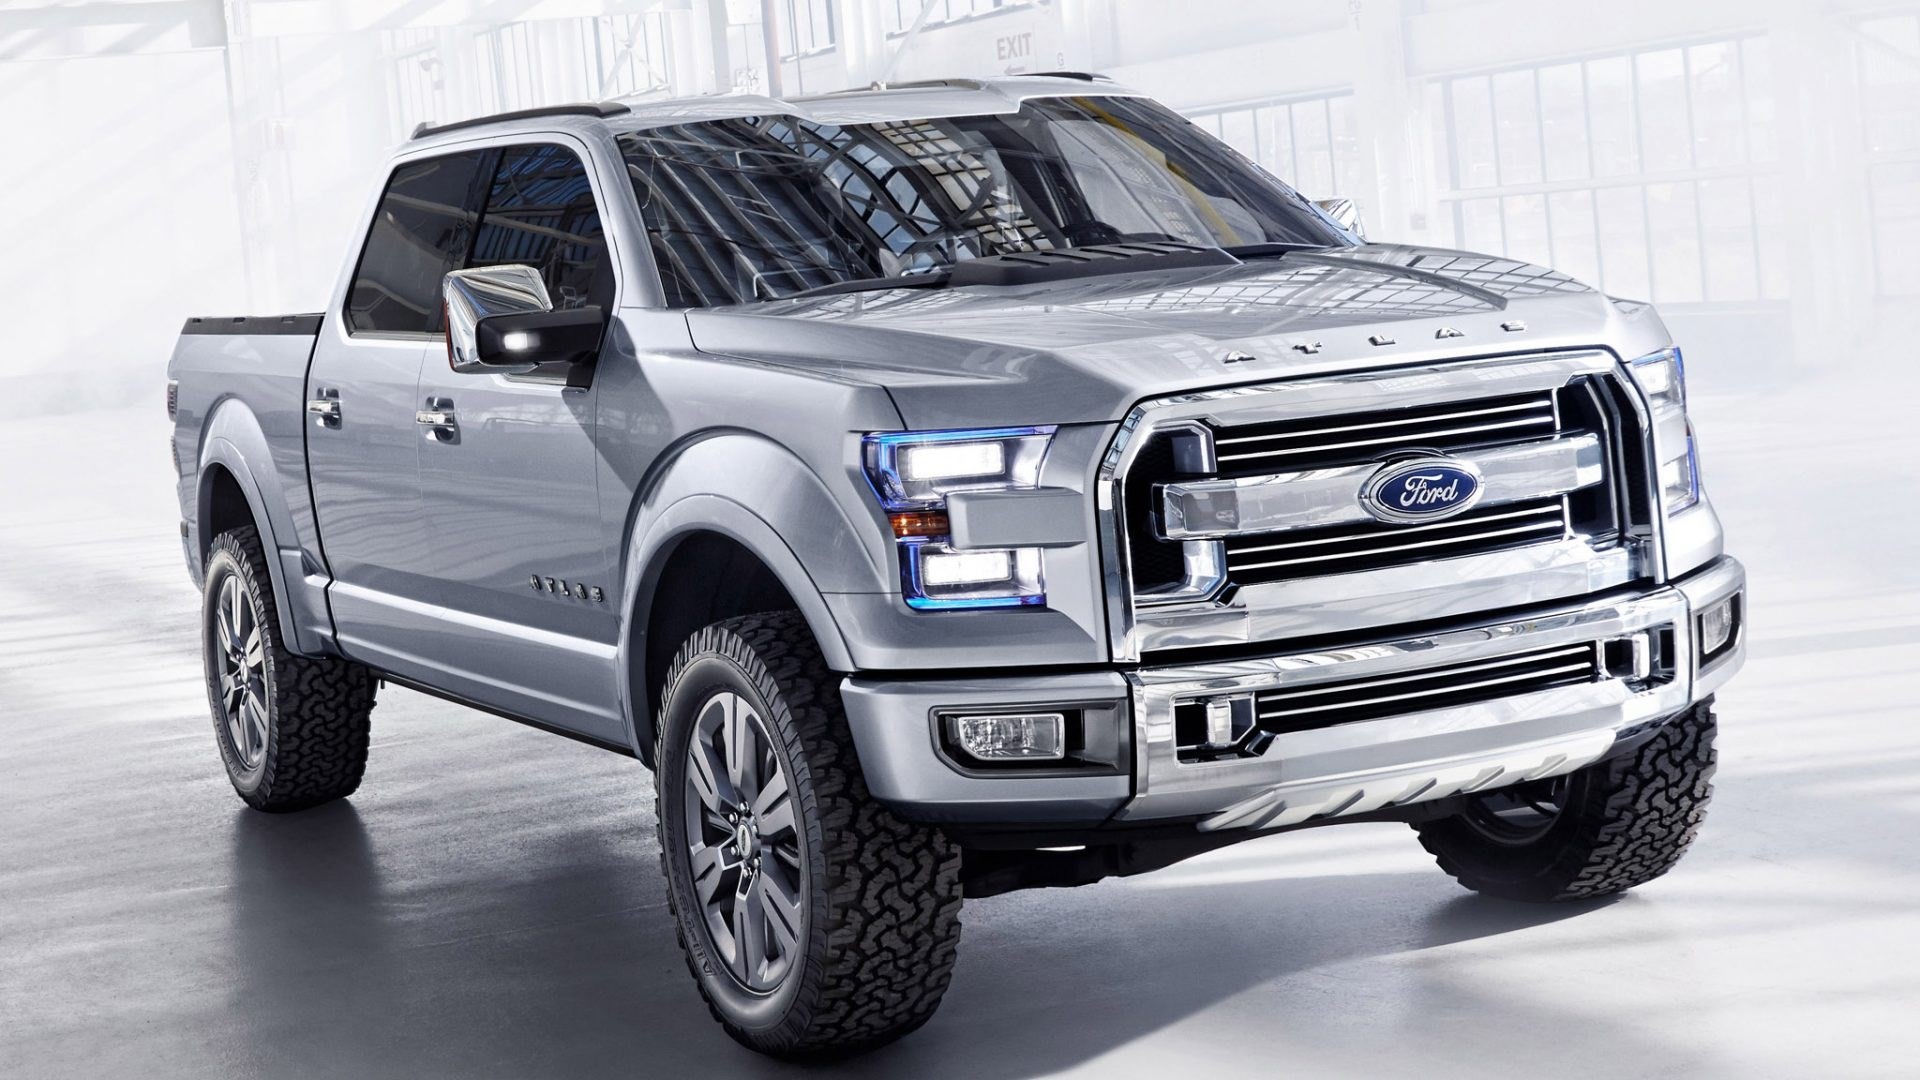 Ford truck wallpaper android 1920×1080